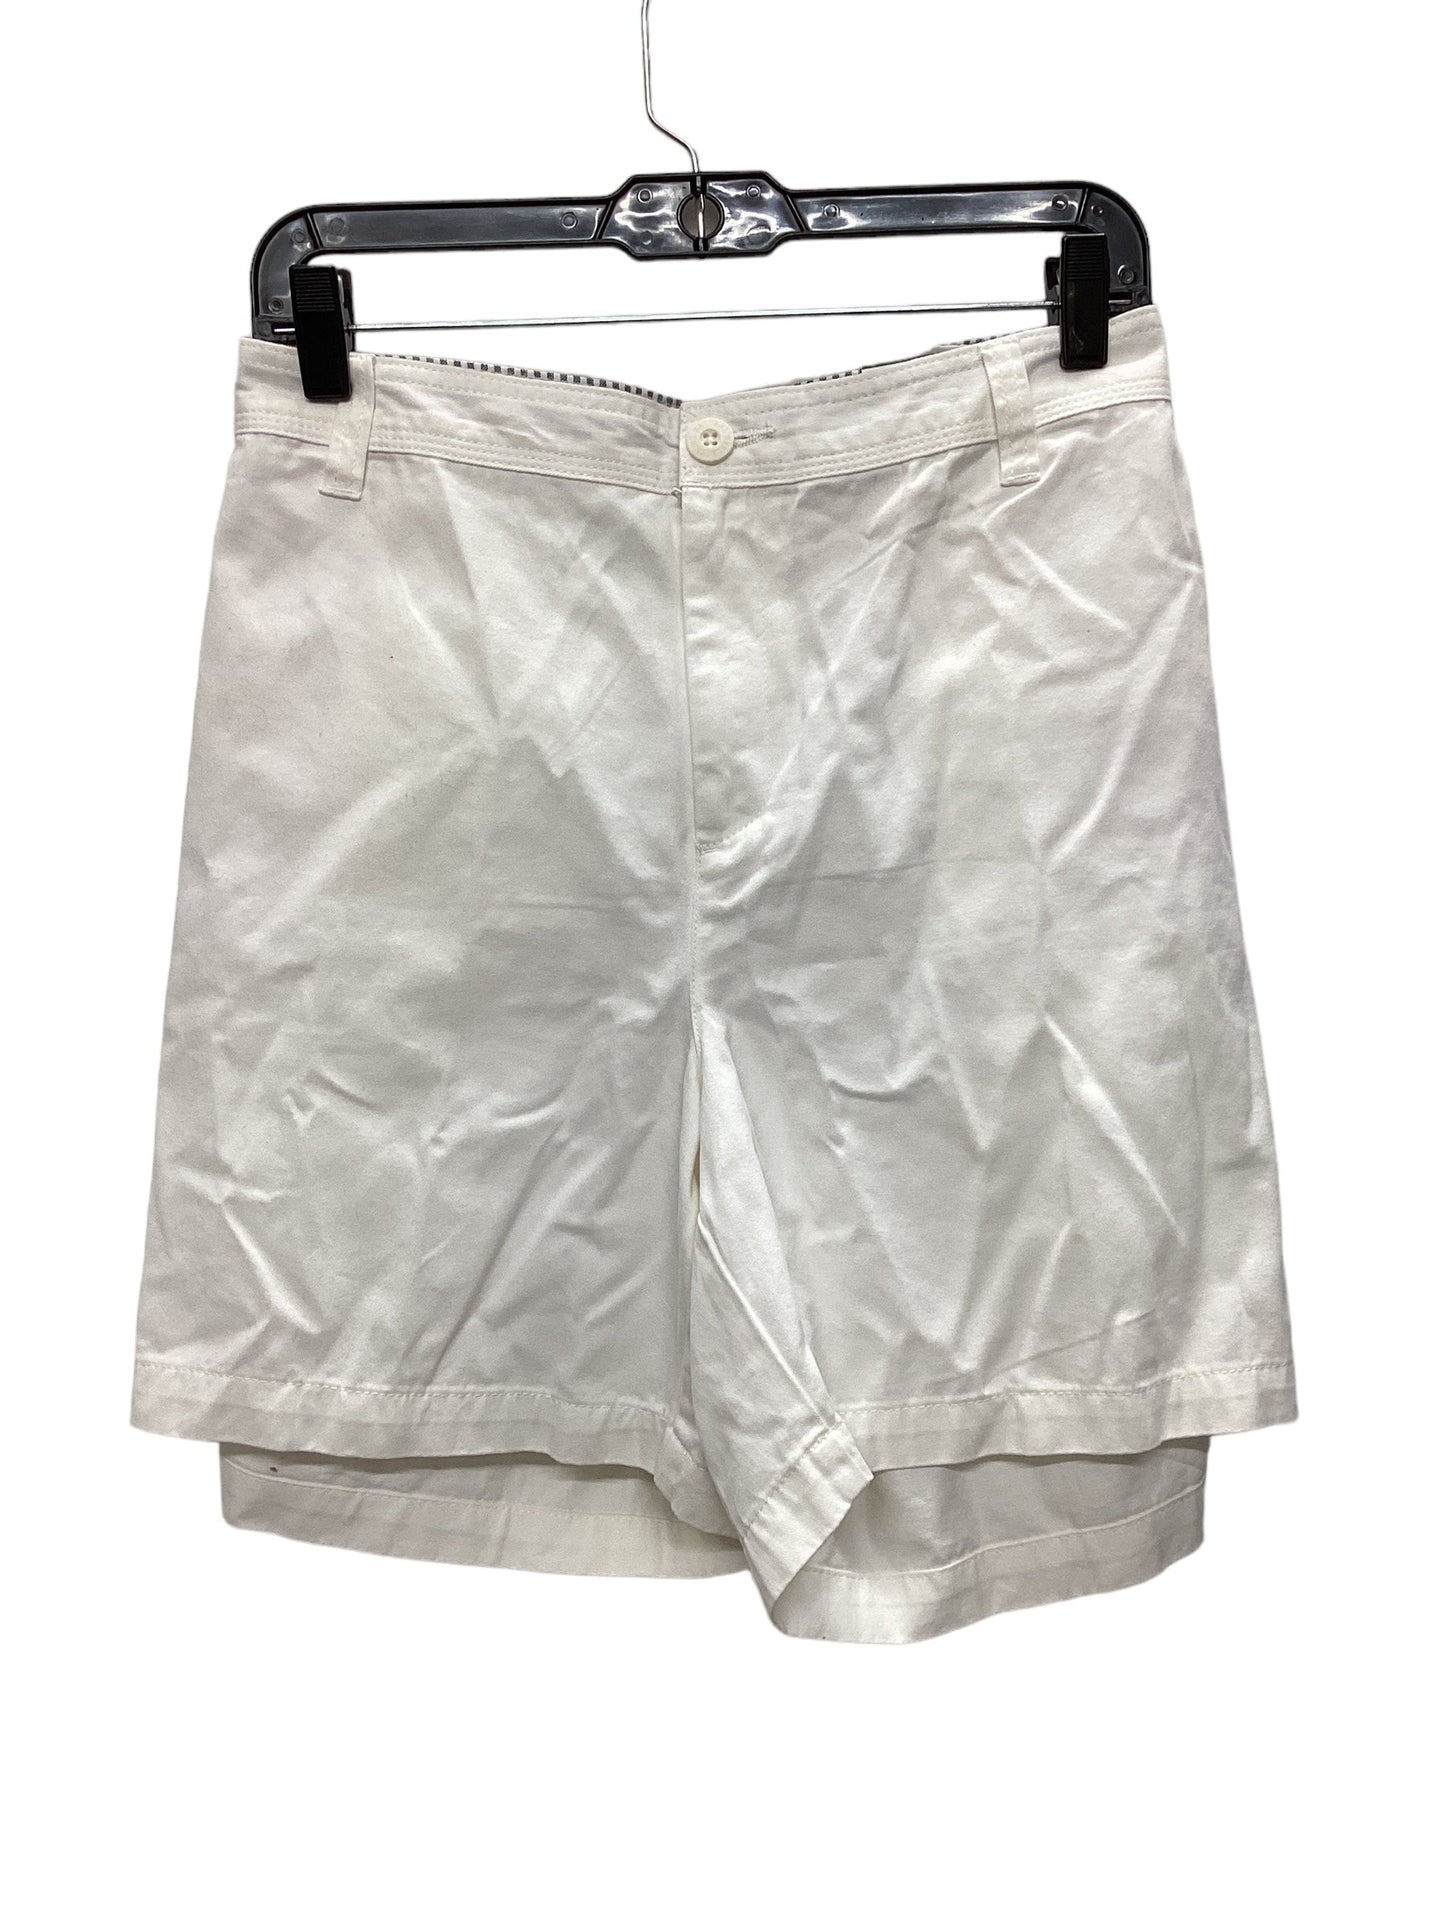 White Shorts Natural Reflections, Size 20